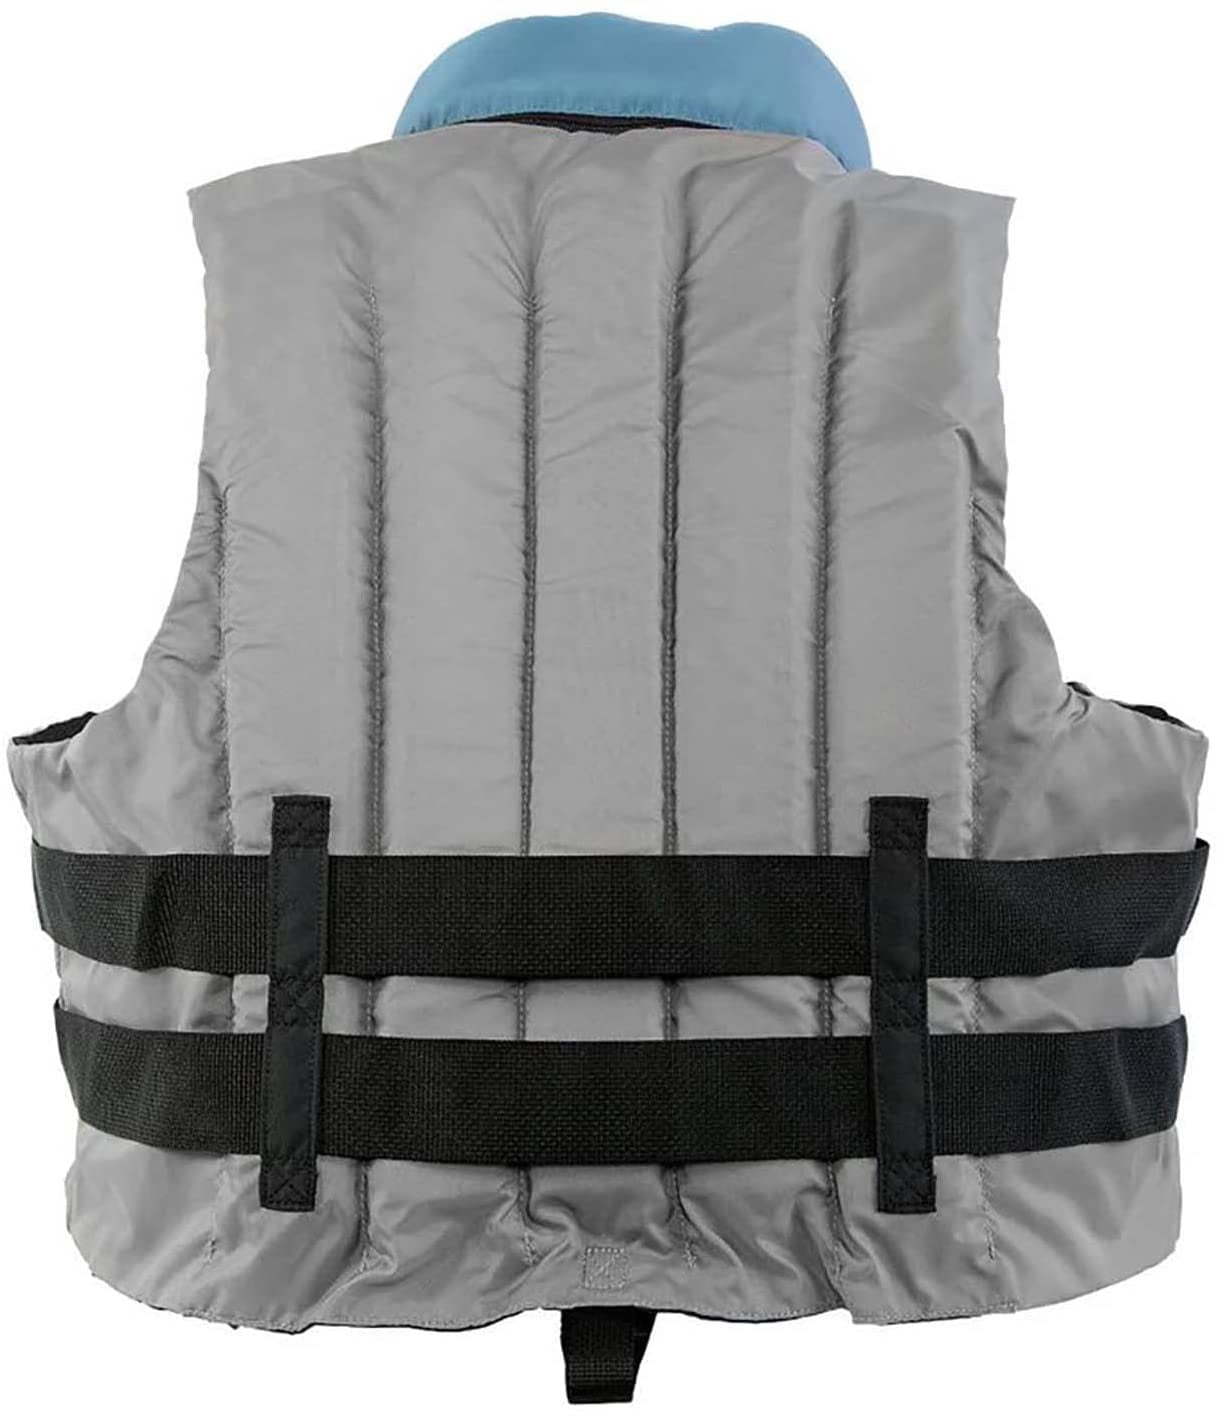 Body Glove Angler Unisex Adult Fishing PFD Life Jacket USCG Approved, Blue  